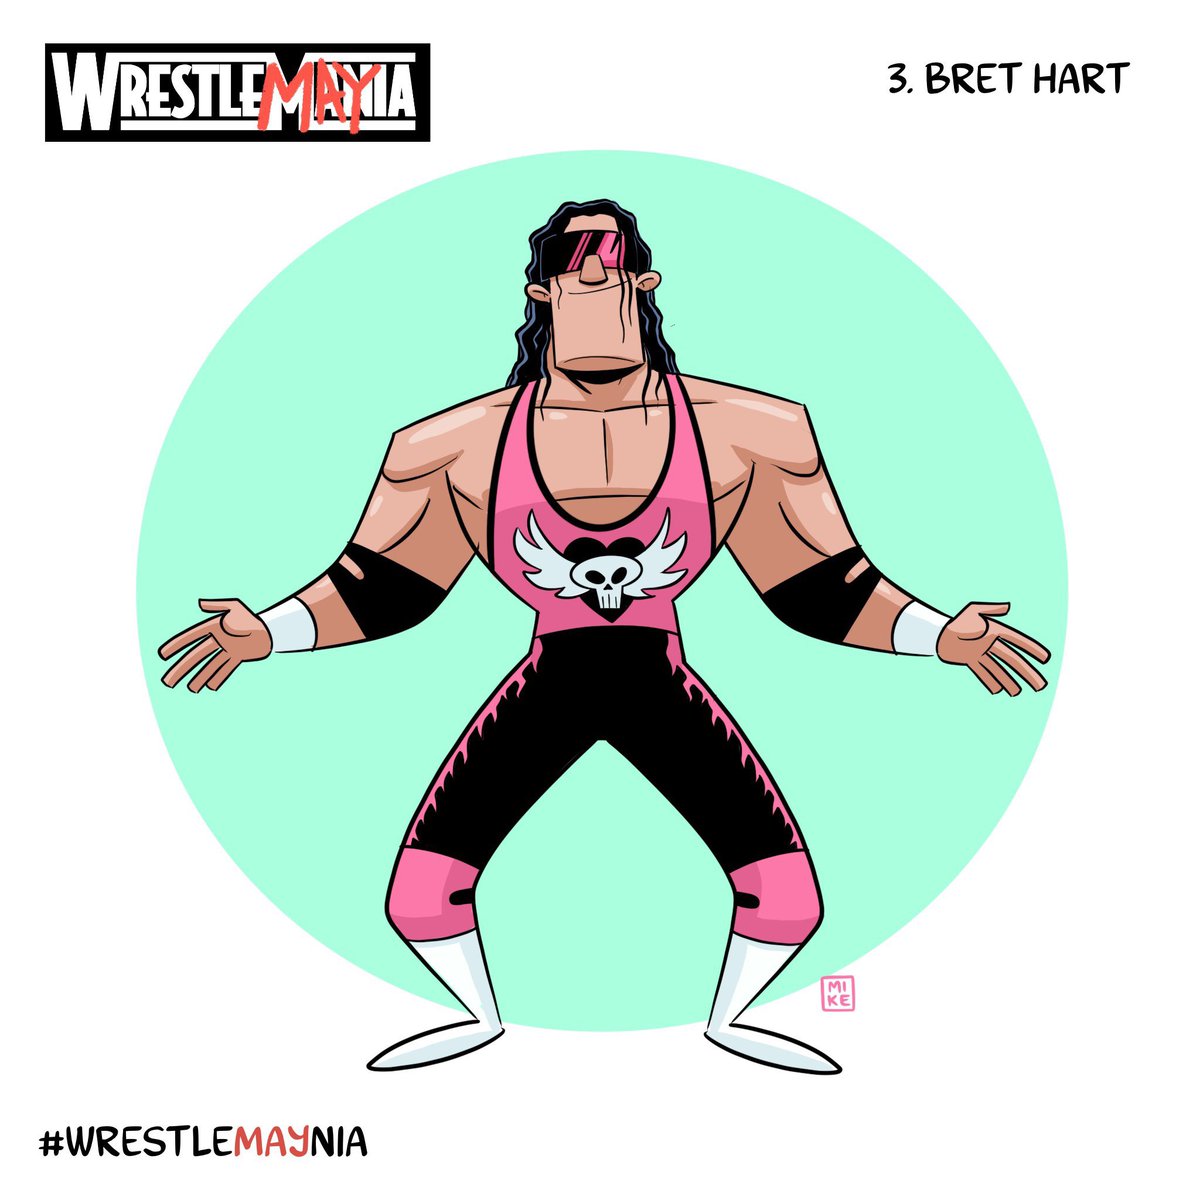 #wrestleMAYnia day 3: The excellence of execution…the best there is, the best there was, the best there ever will be…Bret ‘The Hitman’ Hart (hitman is STILL one of the coolest names for a wrestler IMO)

#wrestling #prowrestling #wwf #wwe #wcw #icw #brethart #bretthehitmanhart